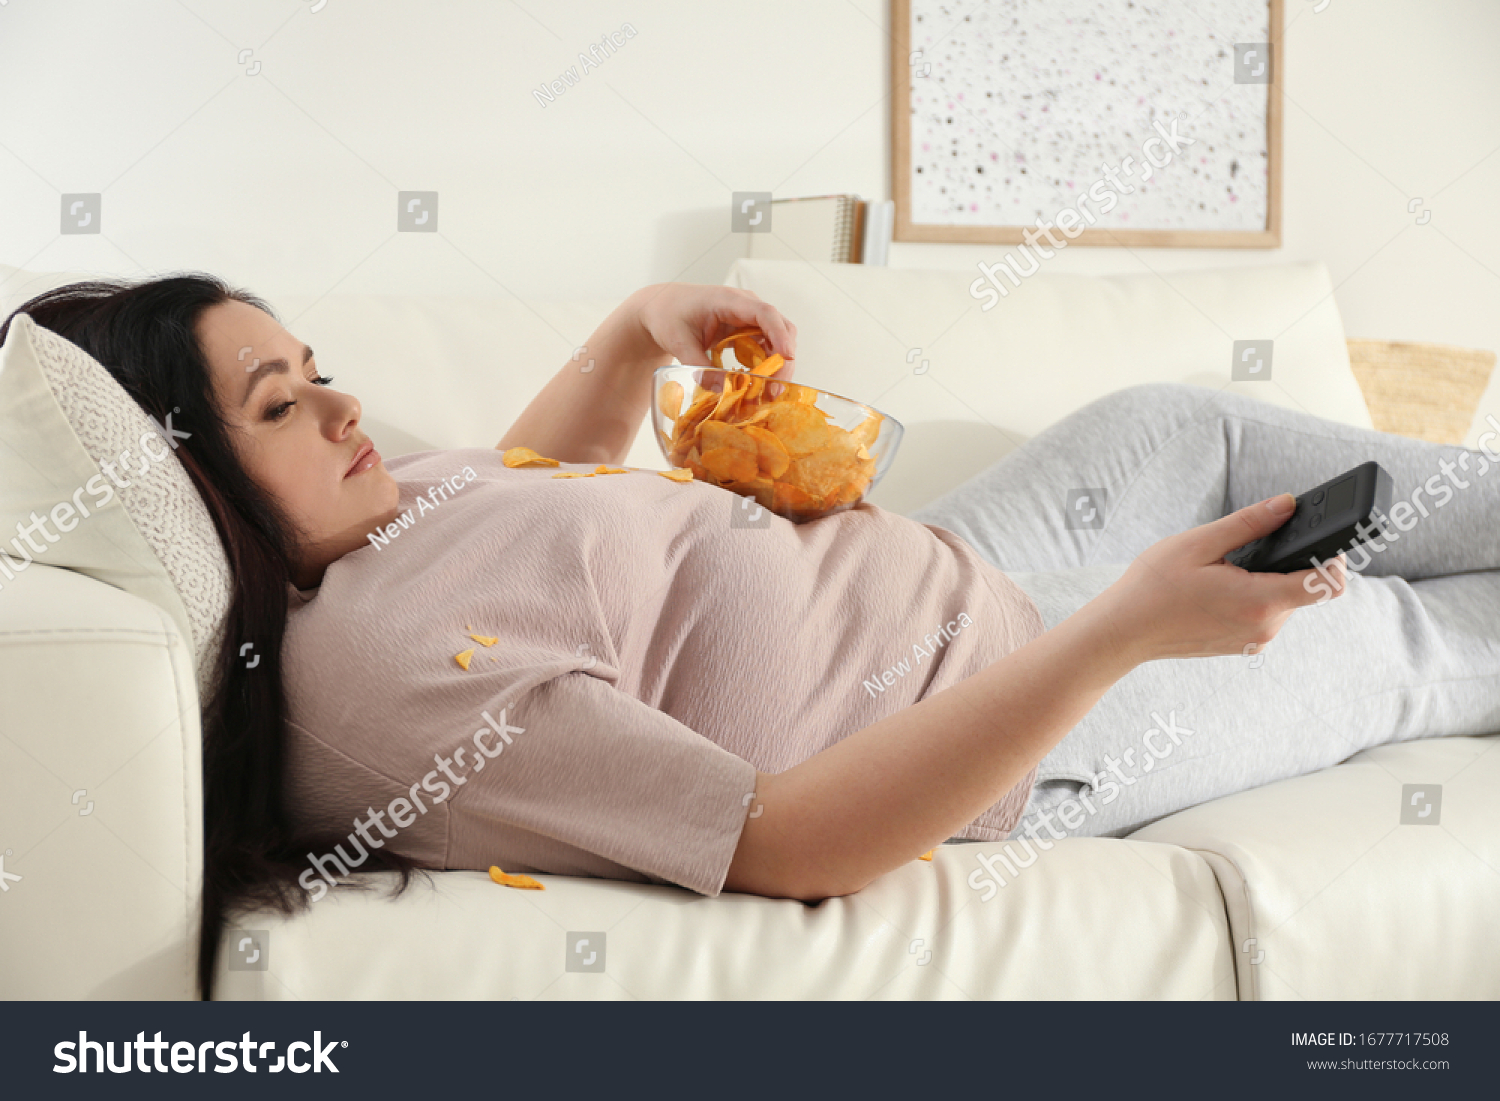 Lazy overweight woman with chips watching TV on sofa at home #1677717508